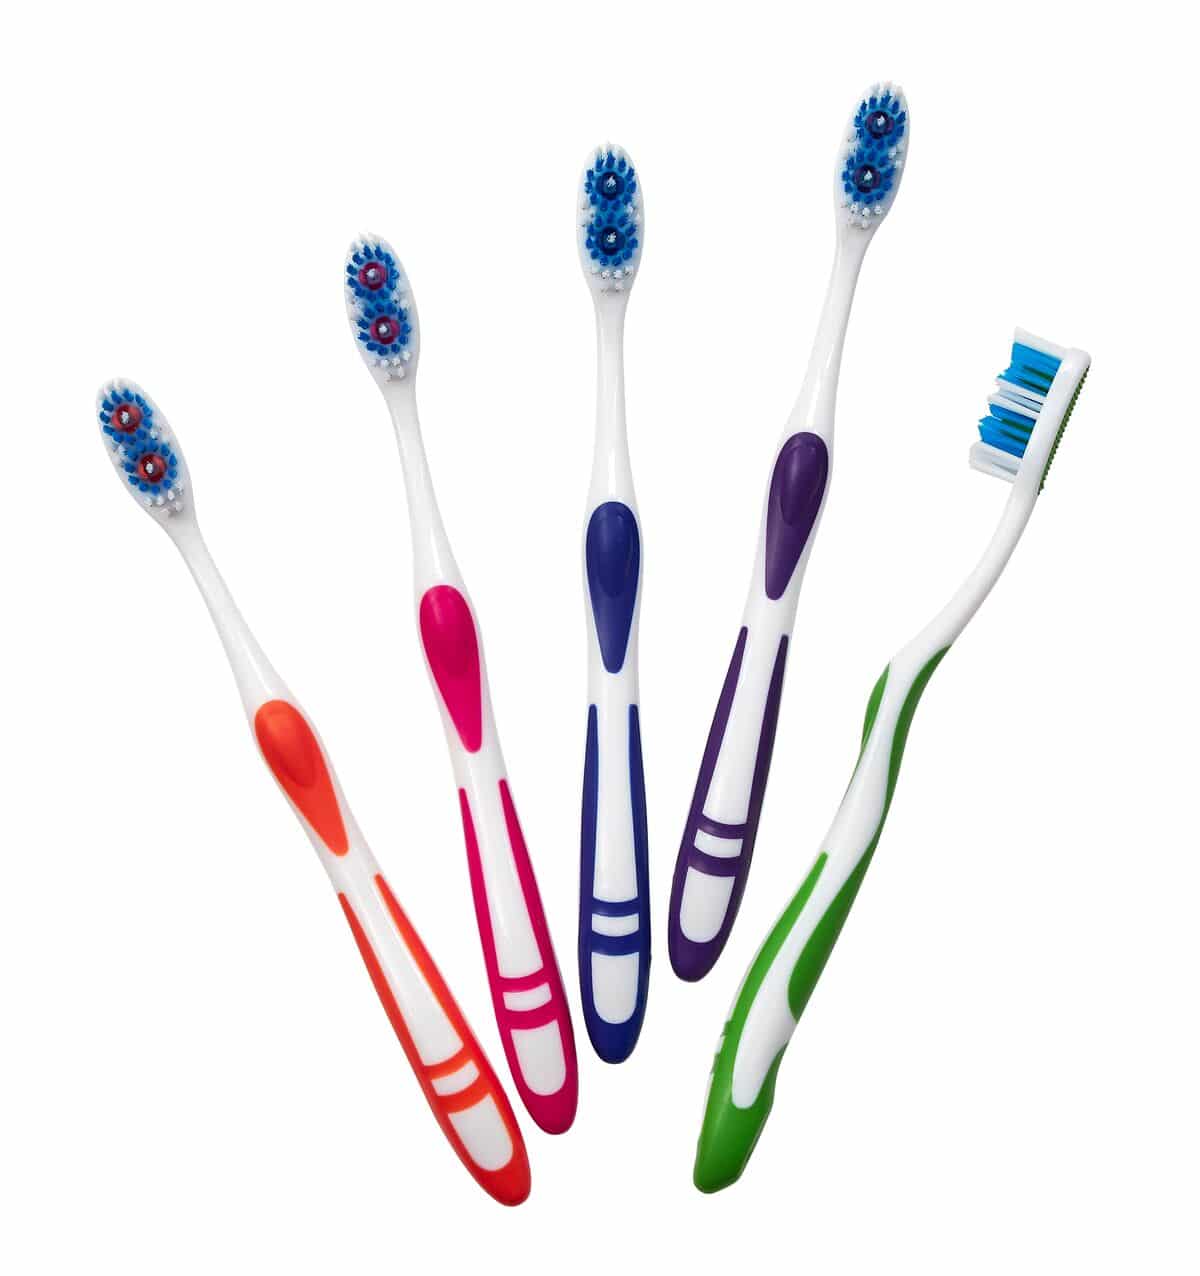 getNewToothbrush Products and Home Business Opportunity